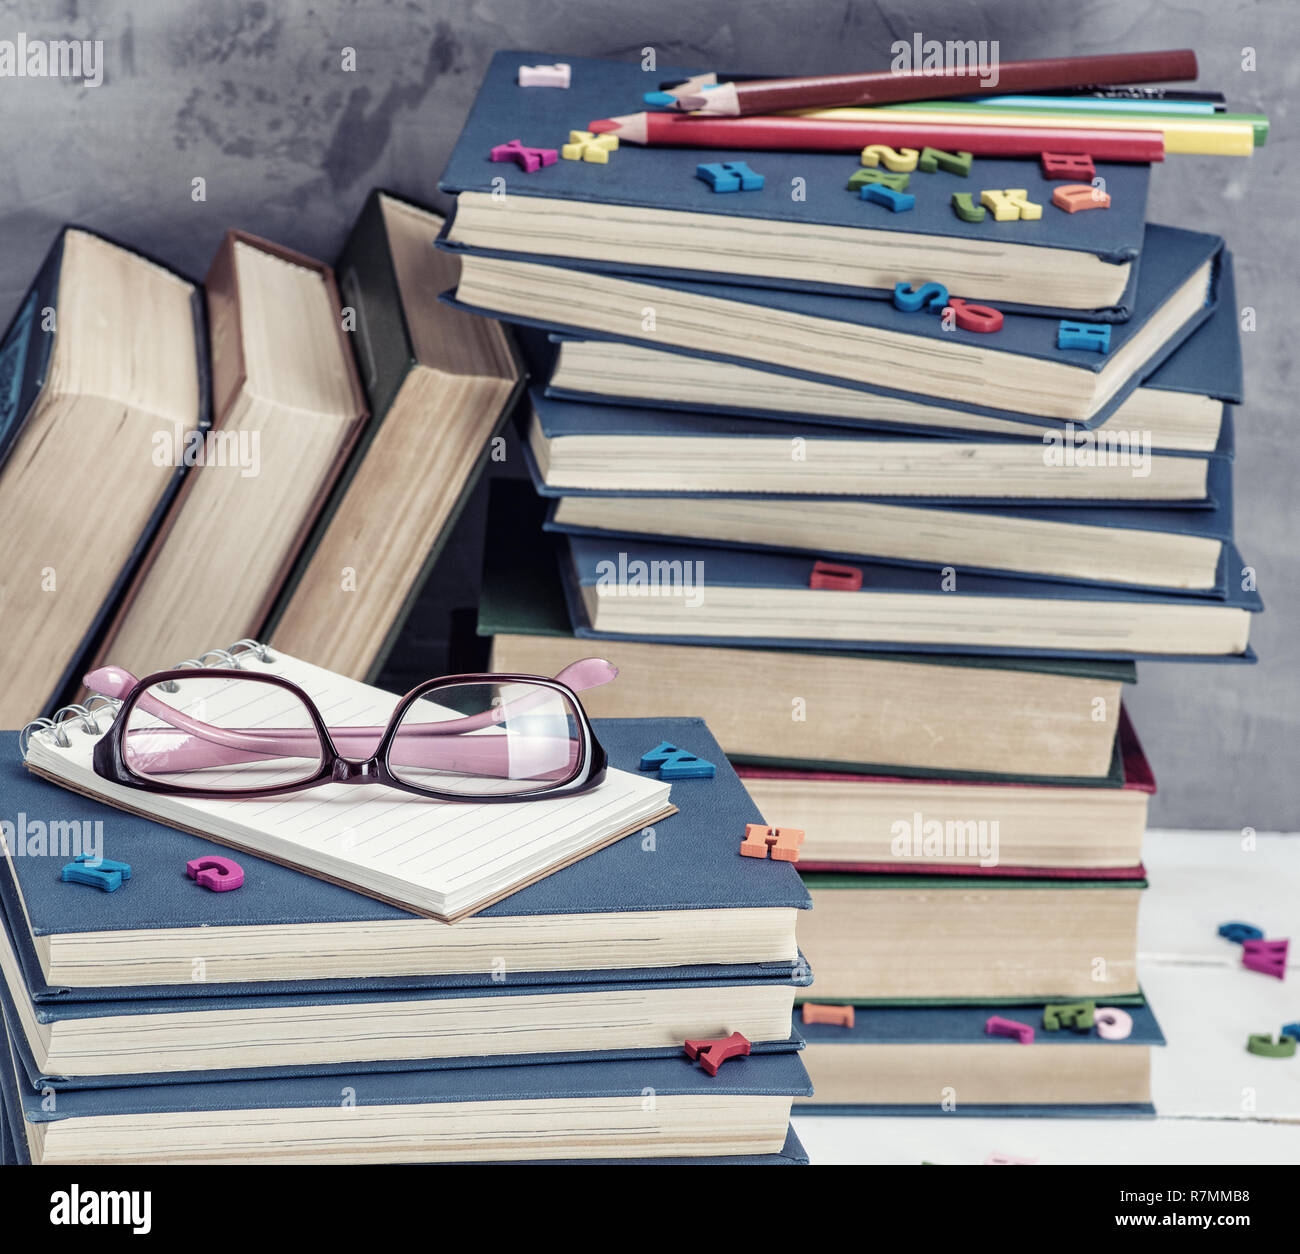 stack of books in a blue cover, pink glasses on top, close up Stock Photo